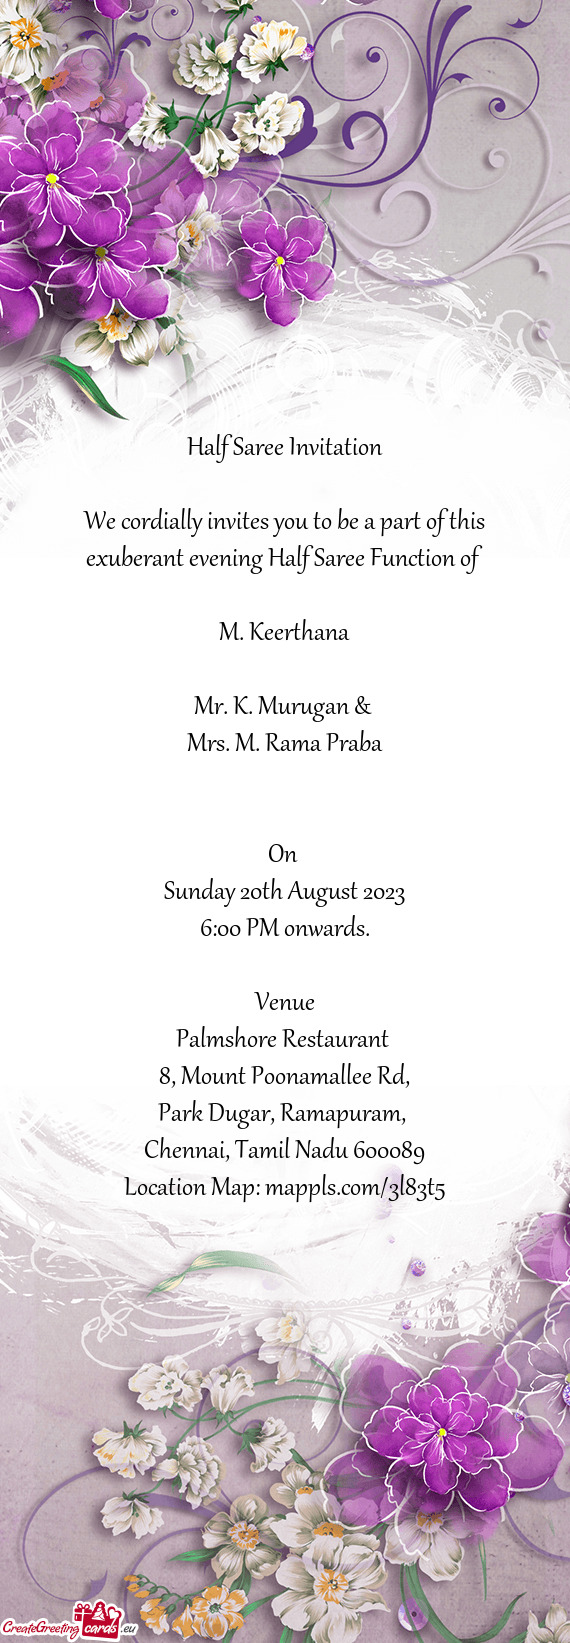 We cordially invites you to be a part of this exuberant evening Half Saree Function of